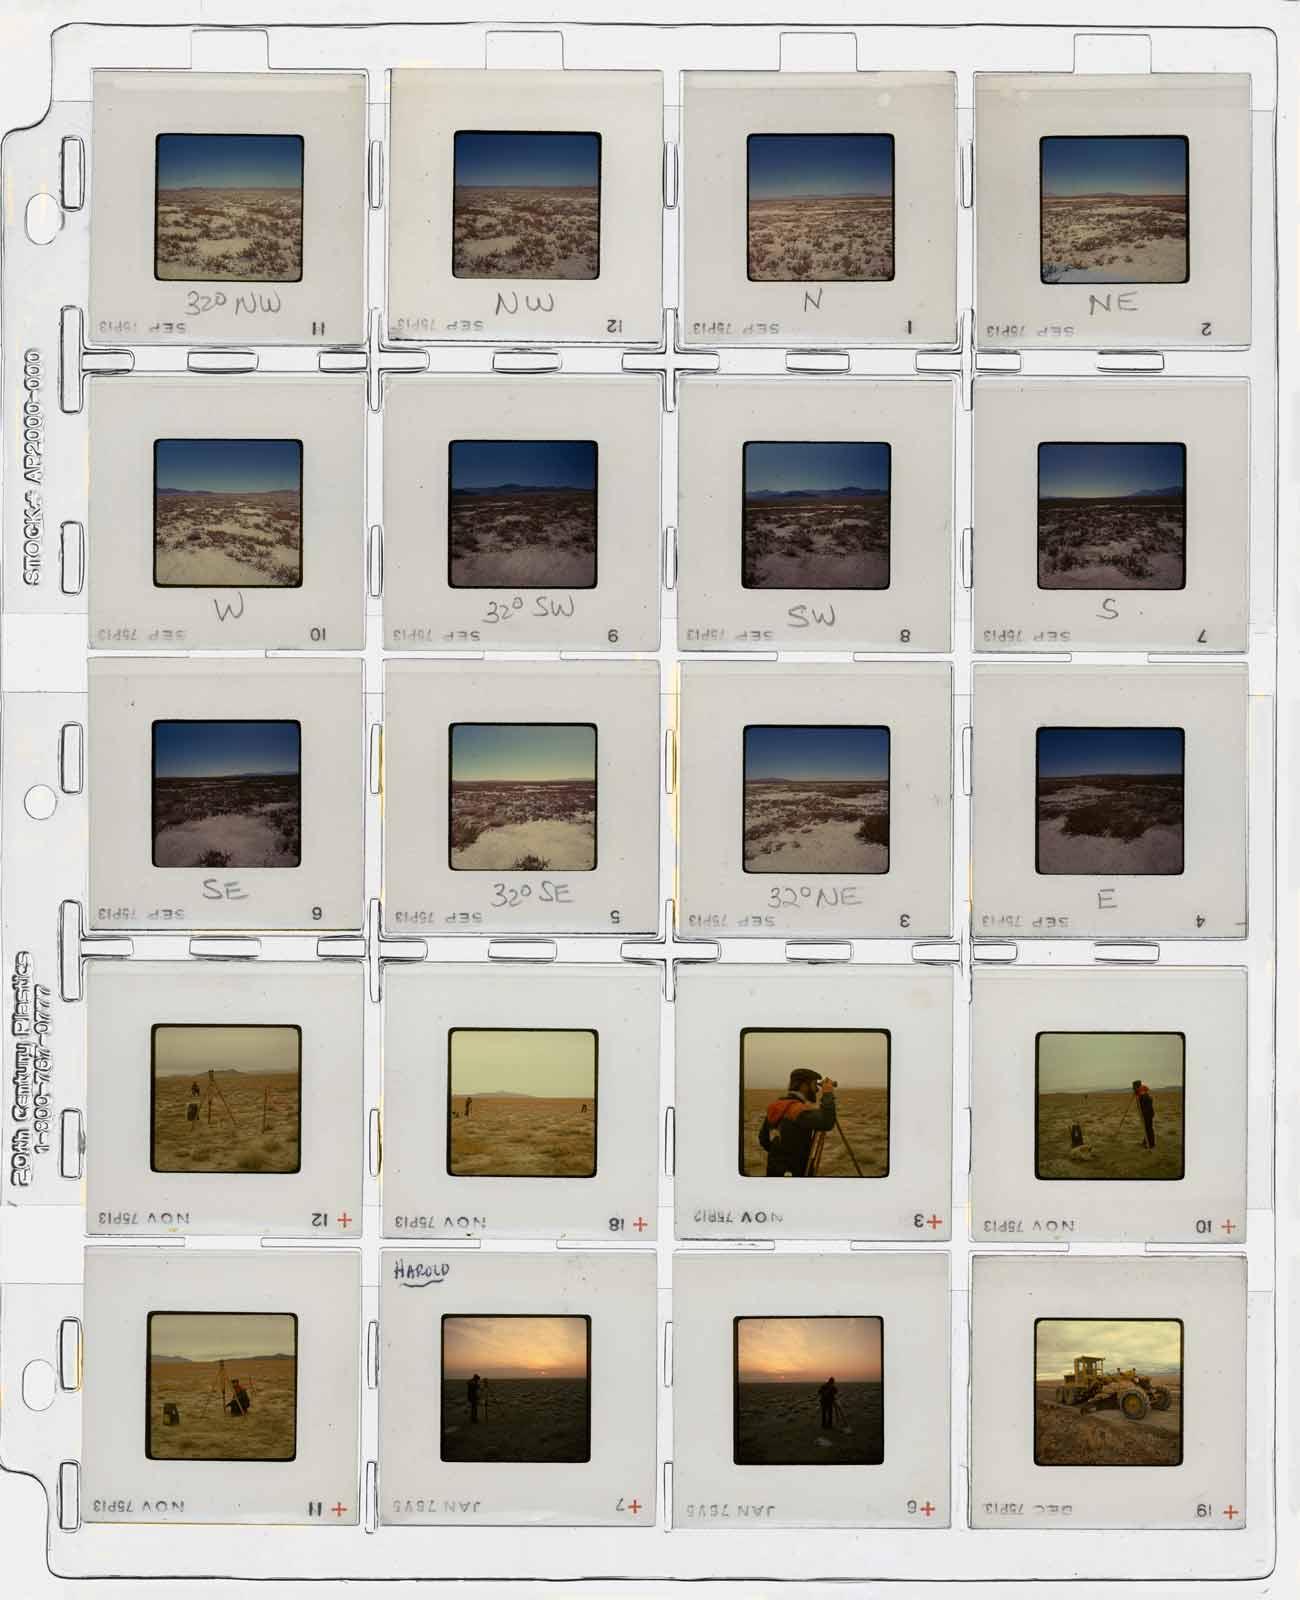 A contact sheet of photo slides of different directional views related to planning Sun Tunnels.